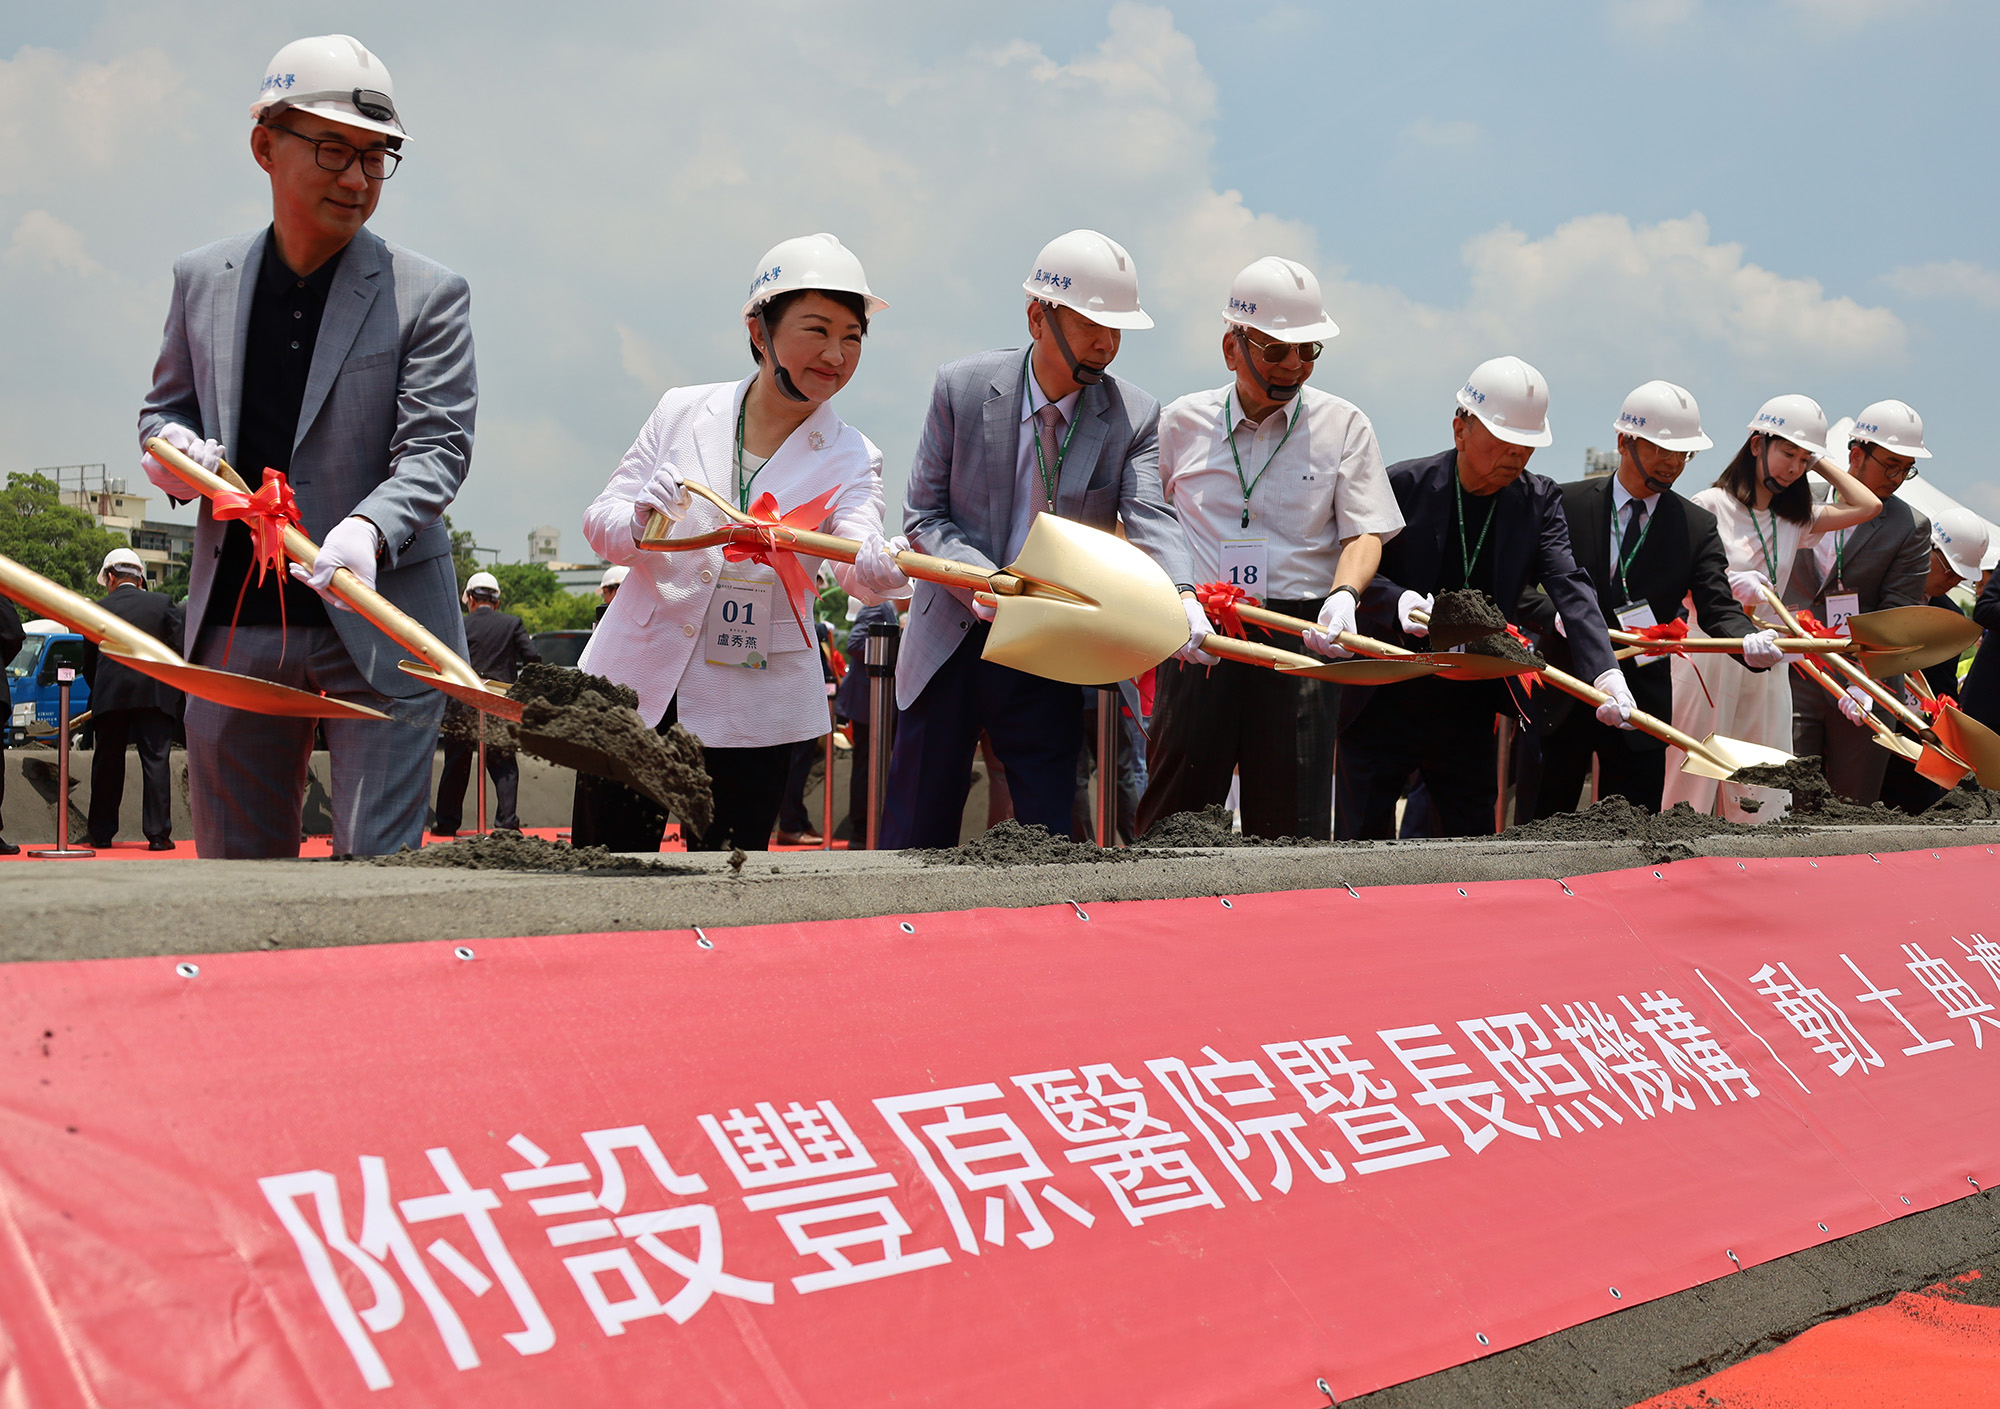 The groundbreaking ceremony of the "Asia University Fengfu Health Park," showing Chang-Hai Tsai, the founder of Asia University (right 3), Mayor Hsiu-Yen Lu of Taichung City (right 2), and Deputy Speaker of the Legislative Yuan Chi-Chen Chiang (right 1)